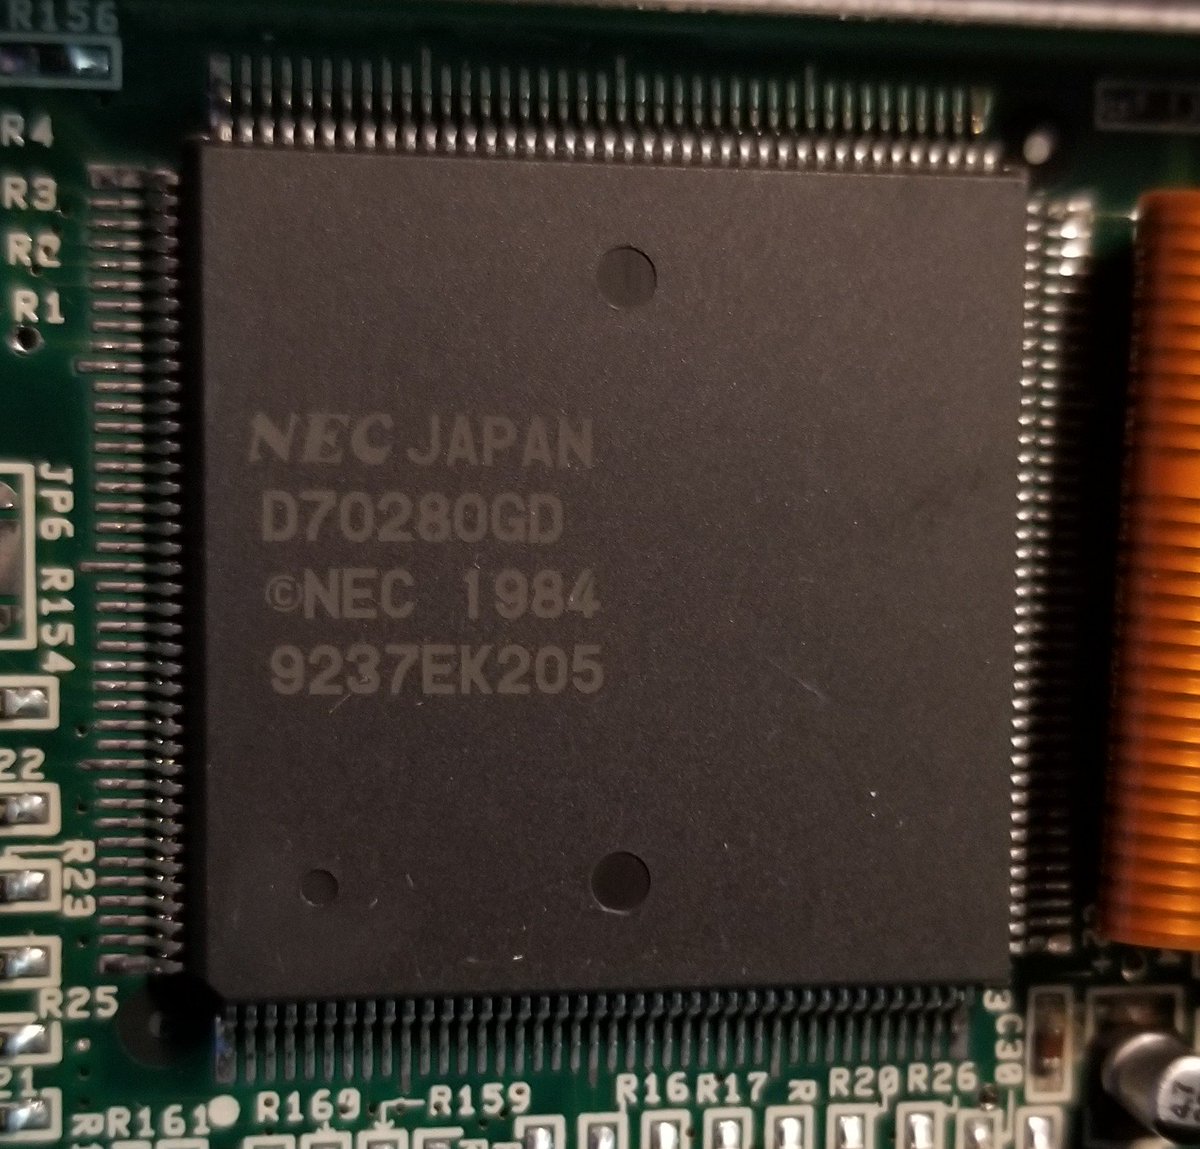 And this turns out to be the CPU! It's an NEC D70280GD. That's a V51 chip, which is a V30HL-based system-on-a-chip. So this is basically an Intel 8086 clone, with built in parallel port, DMA/DRAM controllers & keyboard controllers. It's a low power version, as you'd expect.